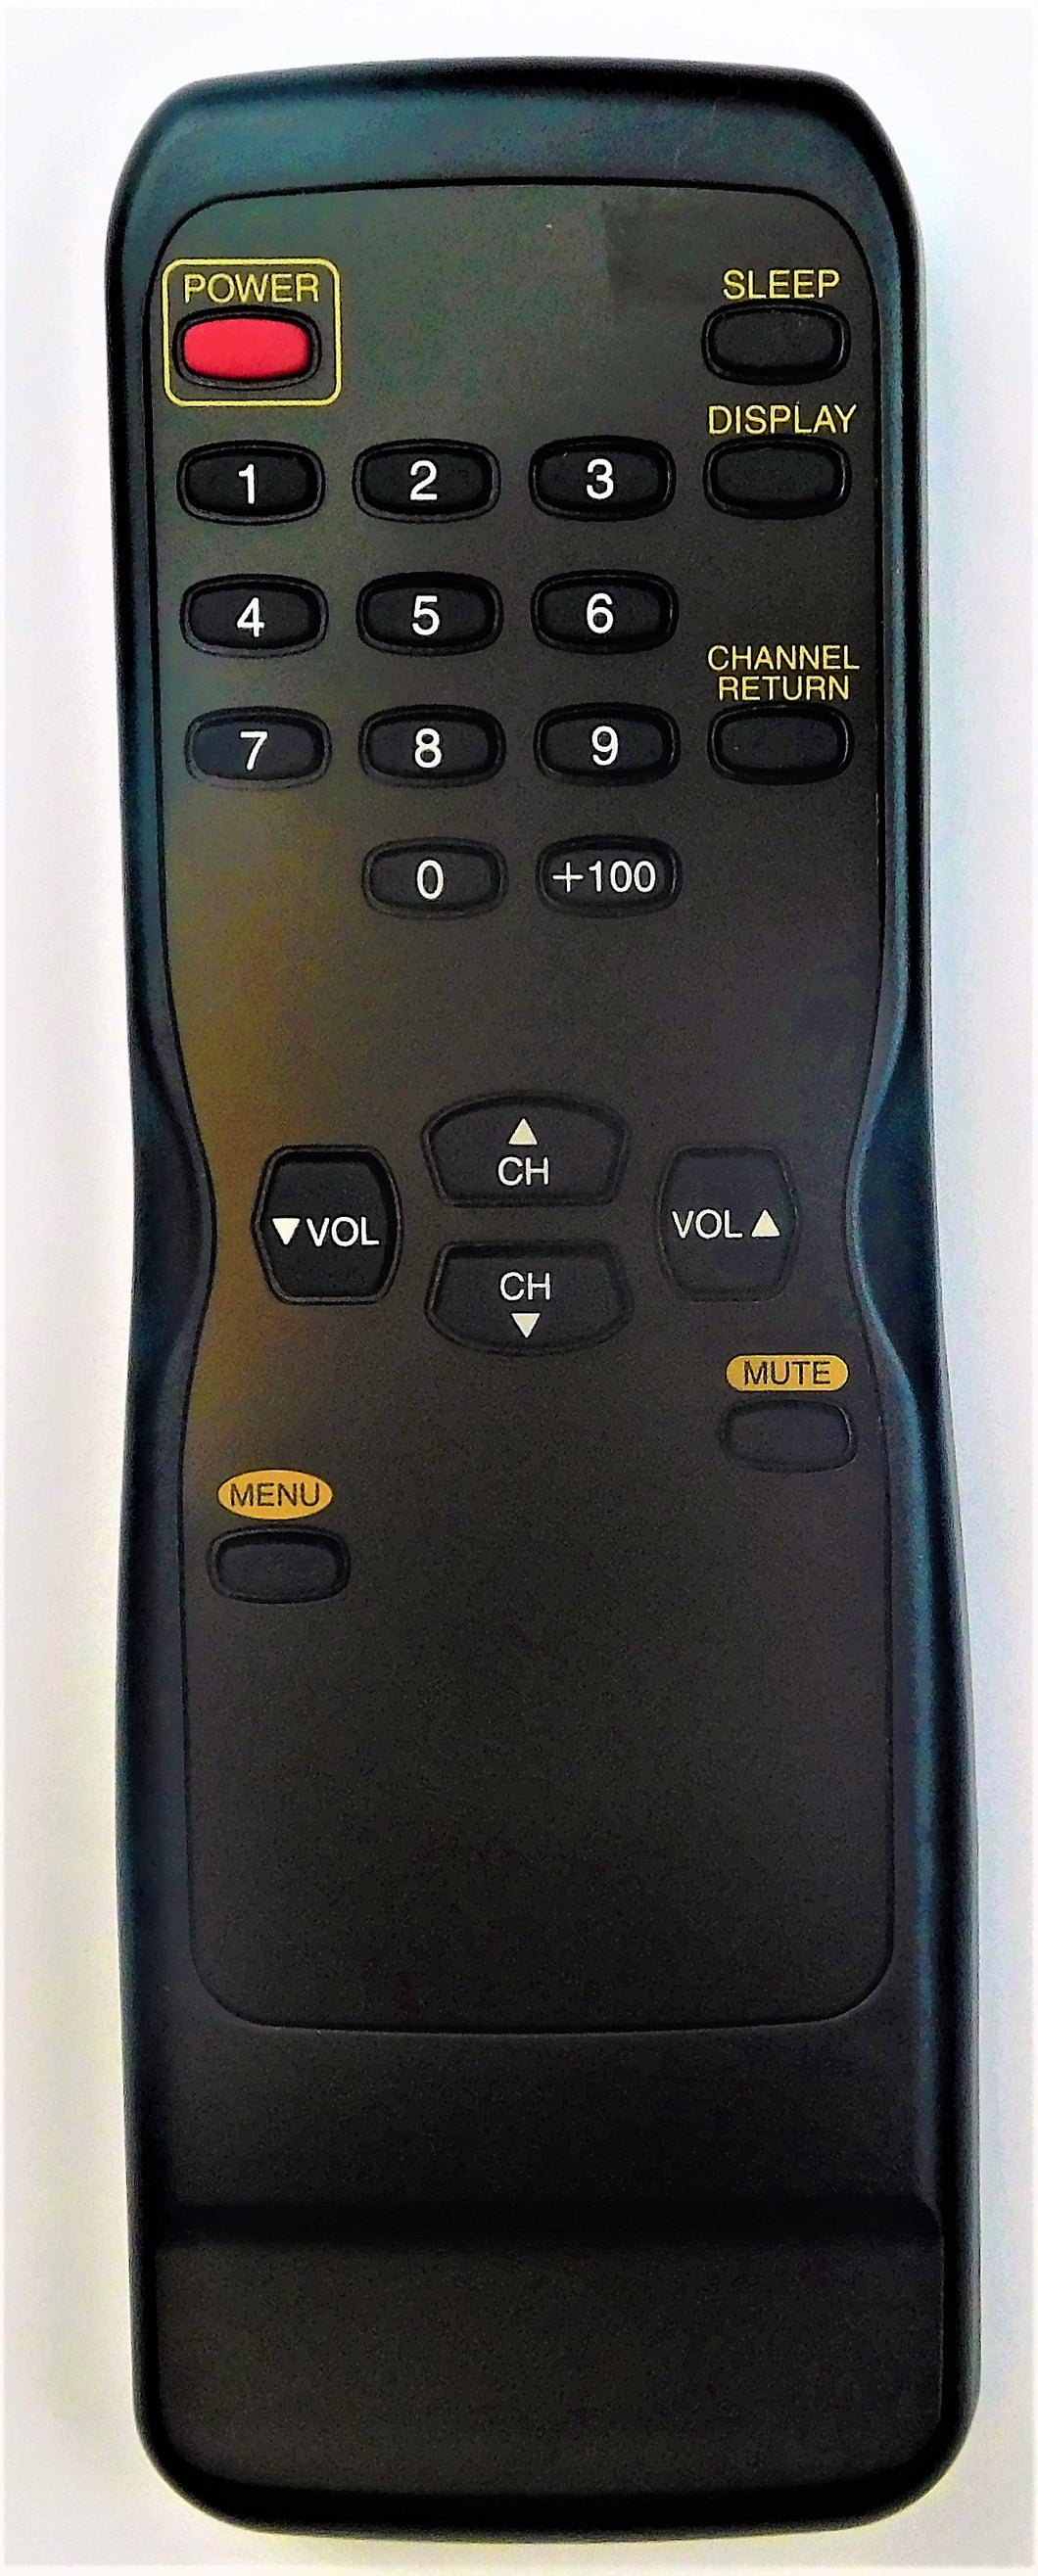 OEM replacement remote control for Emerson, Symphonic CRT TV N0105UD